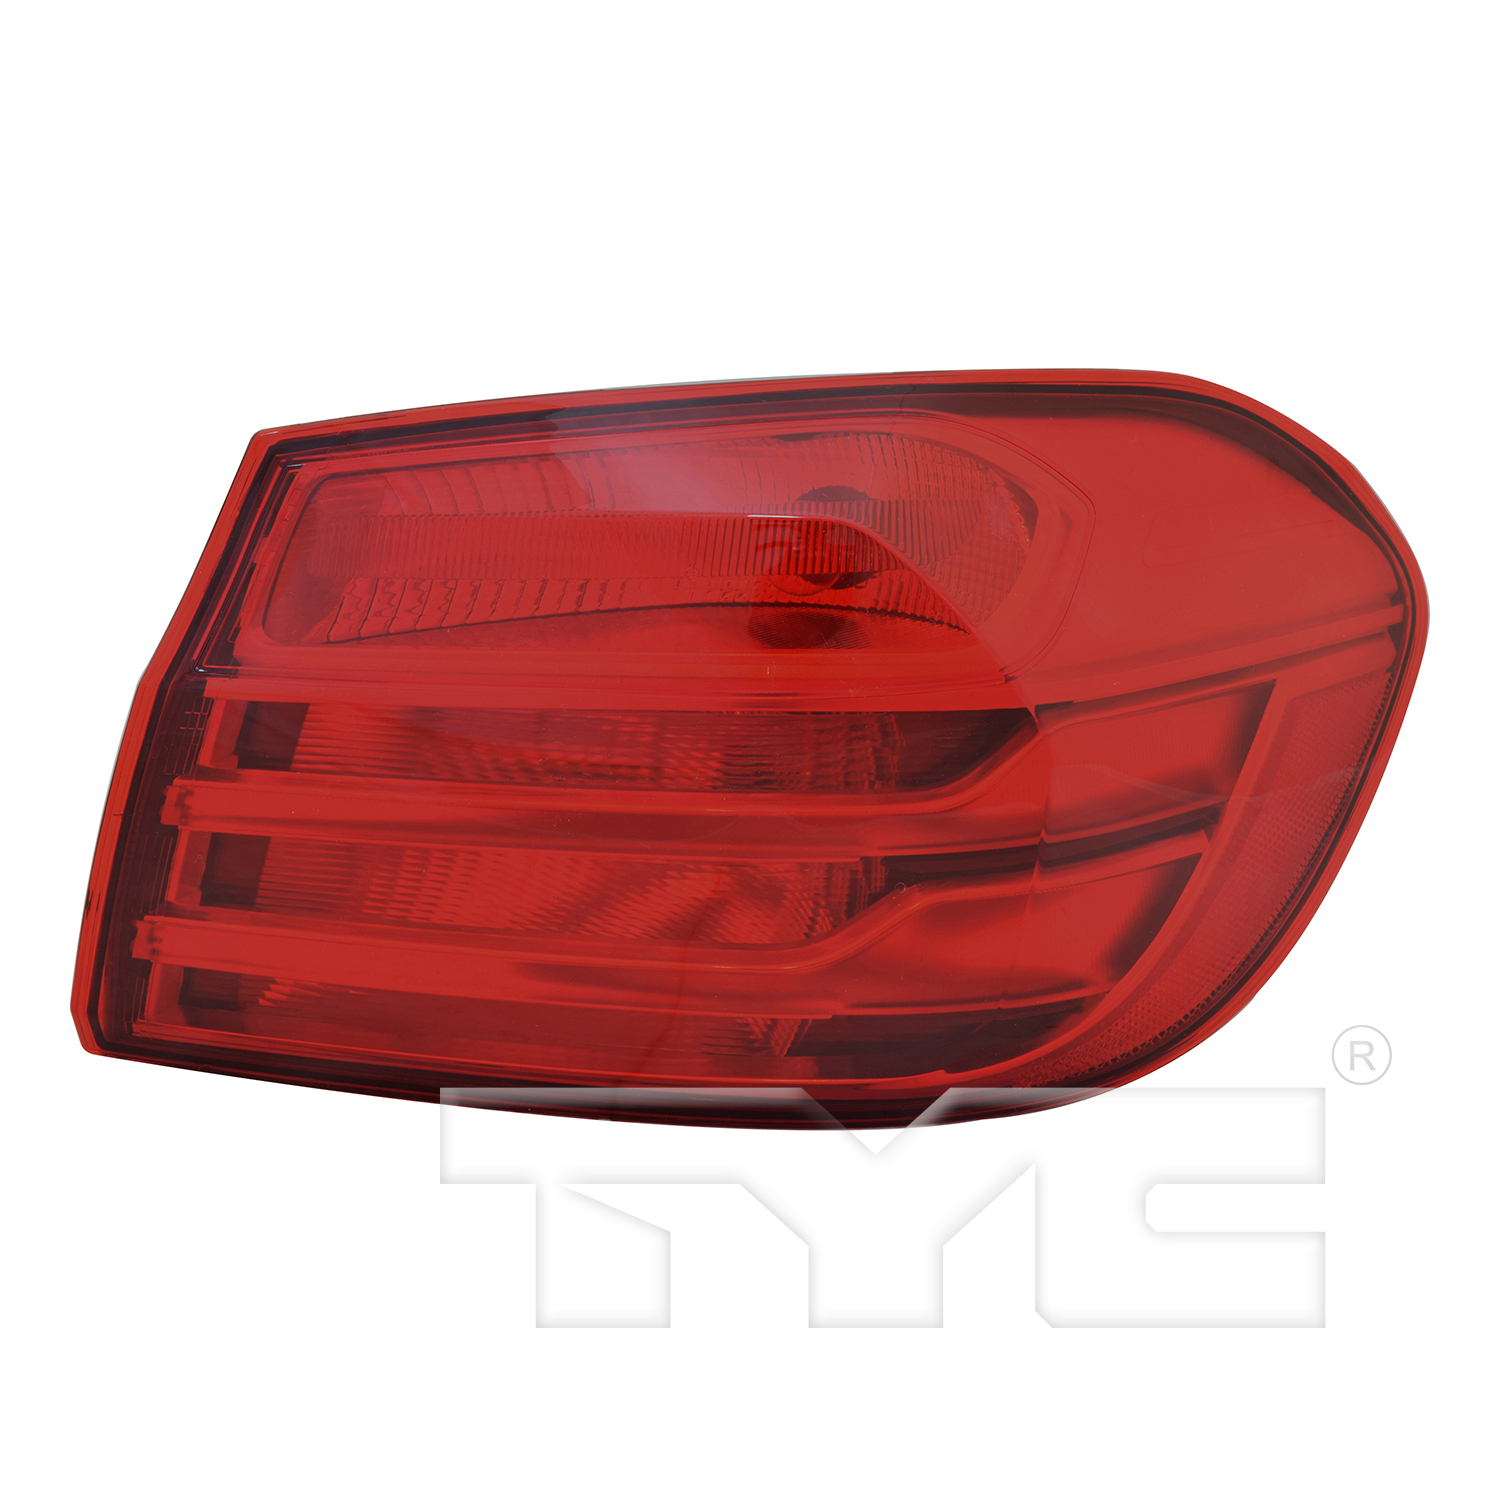 Aftermarket TAILLIGHTS for BMW - 428I GRAN COUPE, 428i Gran Coupe,15-16,RT Taillamp assy outer